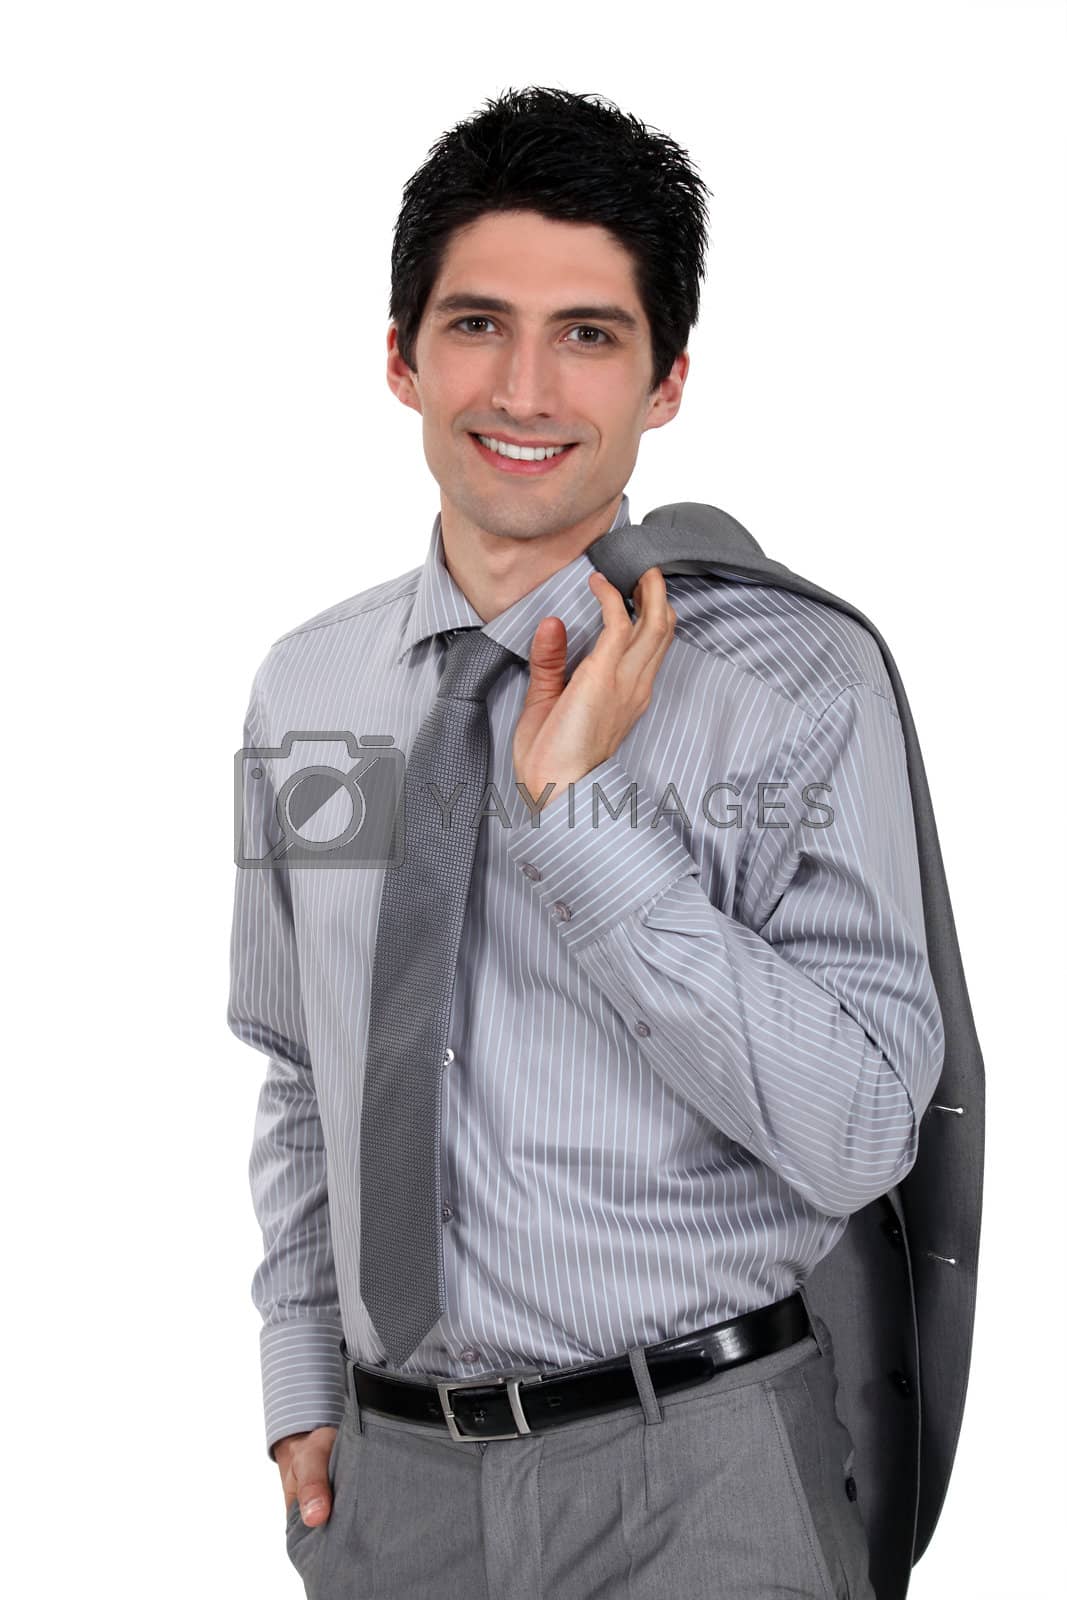 Royalty free image of Man holding his suit jacket over his shoulder by phovoir